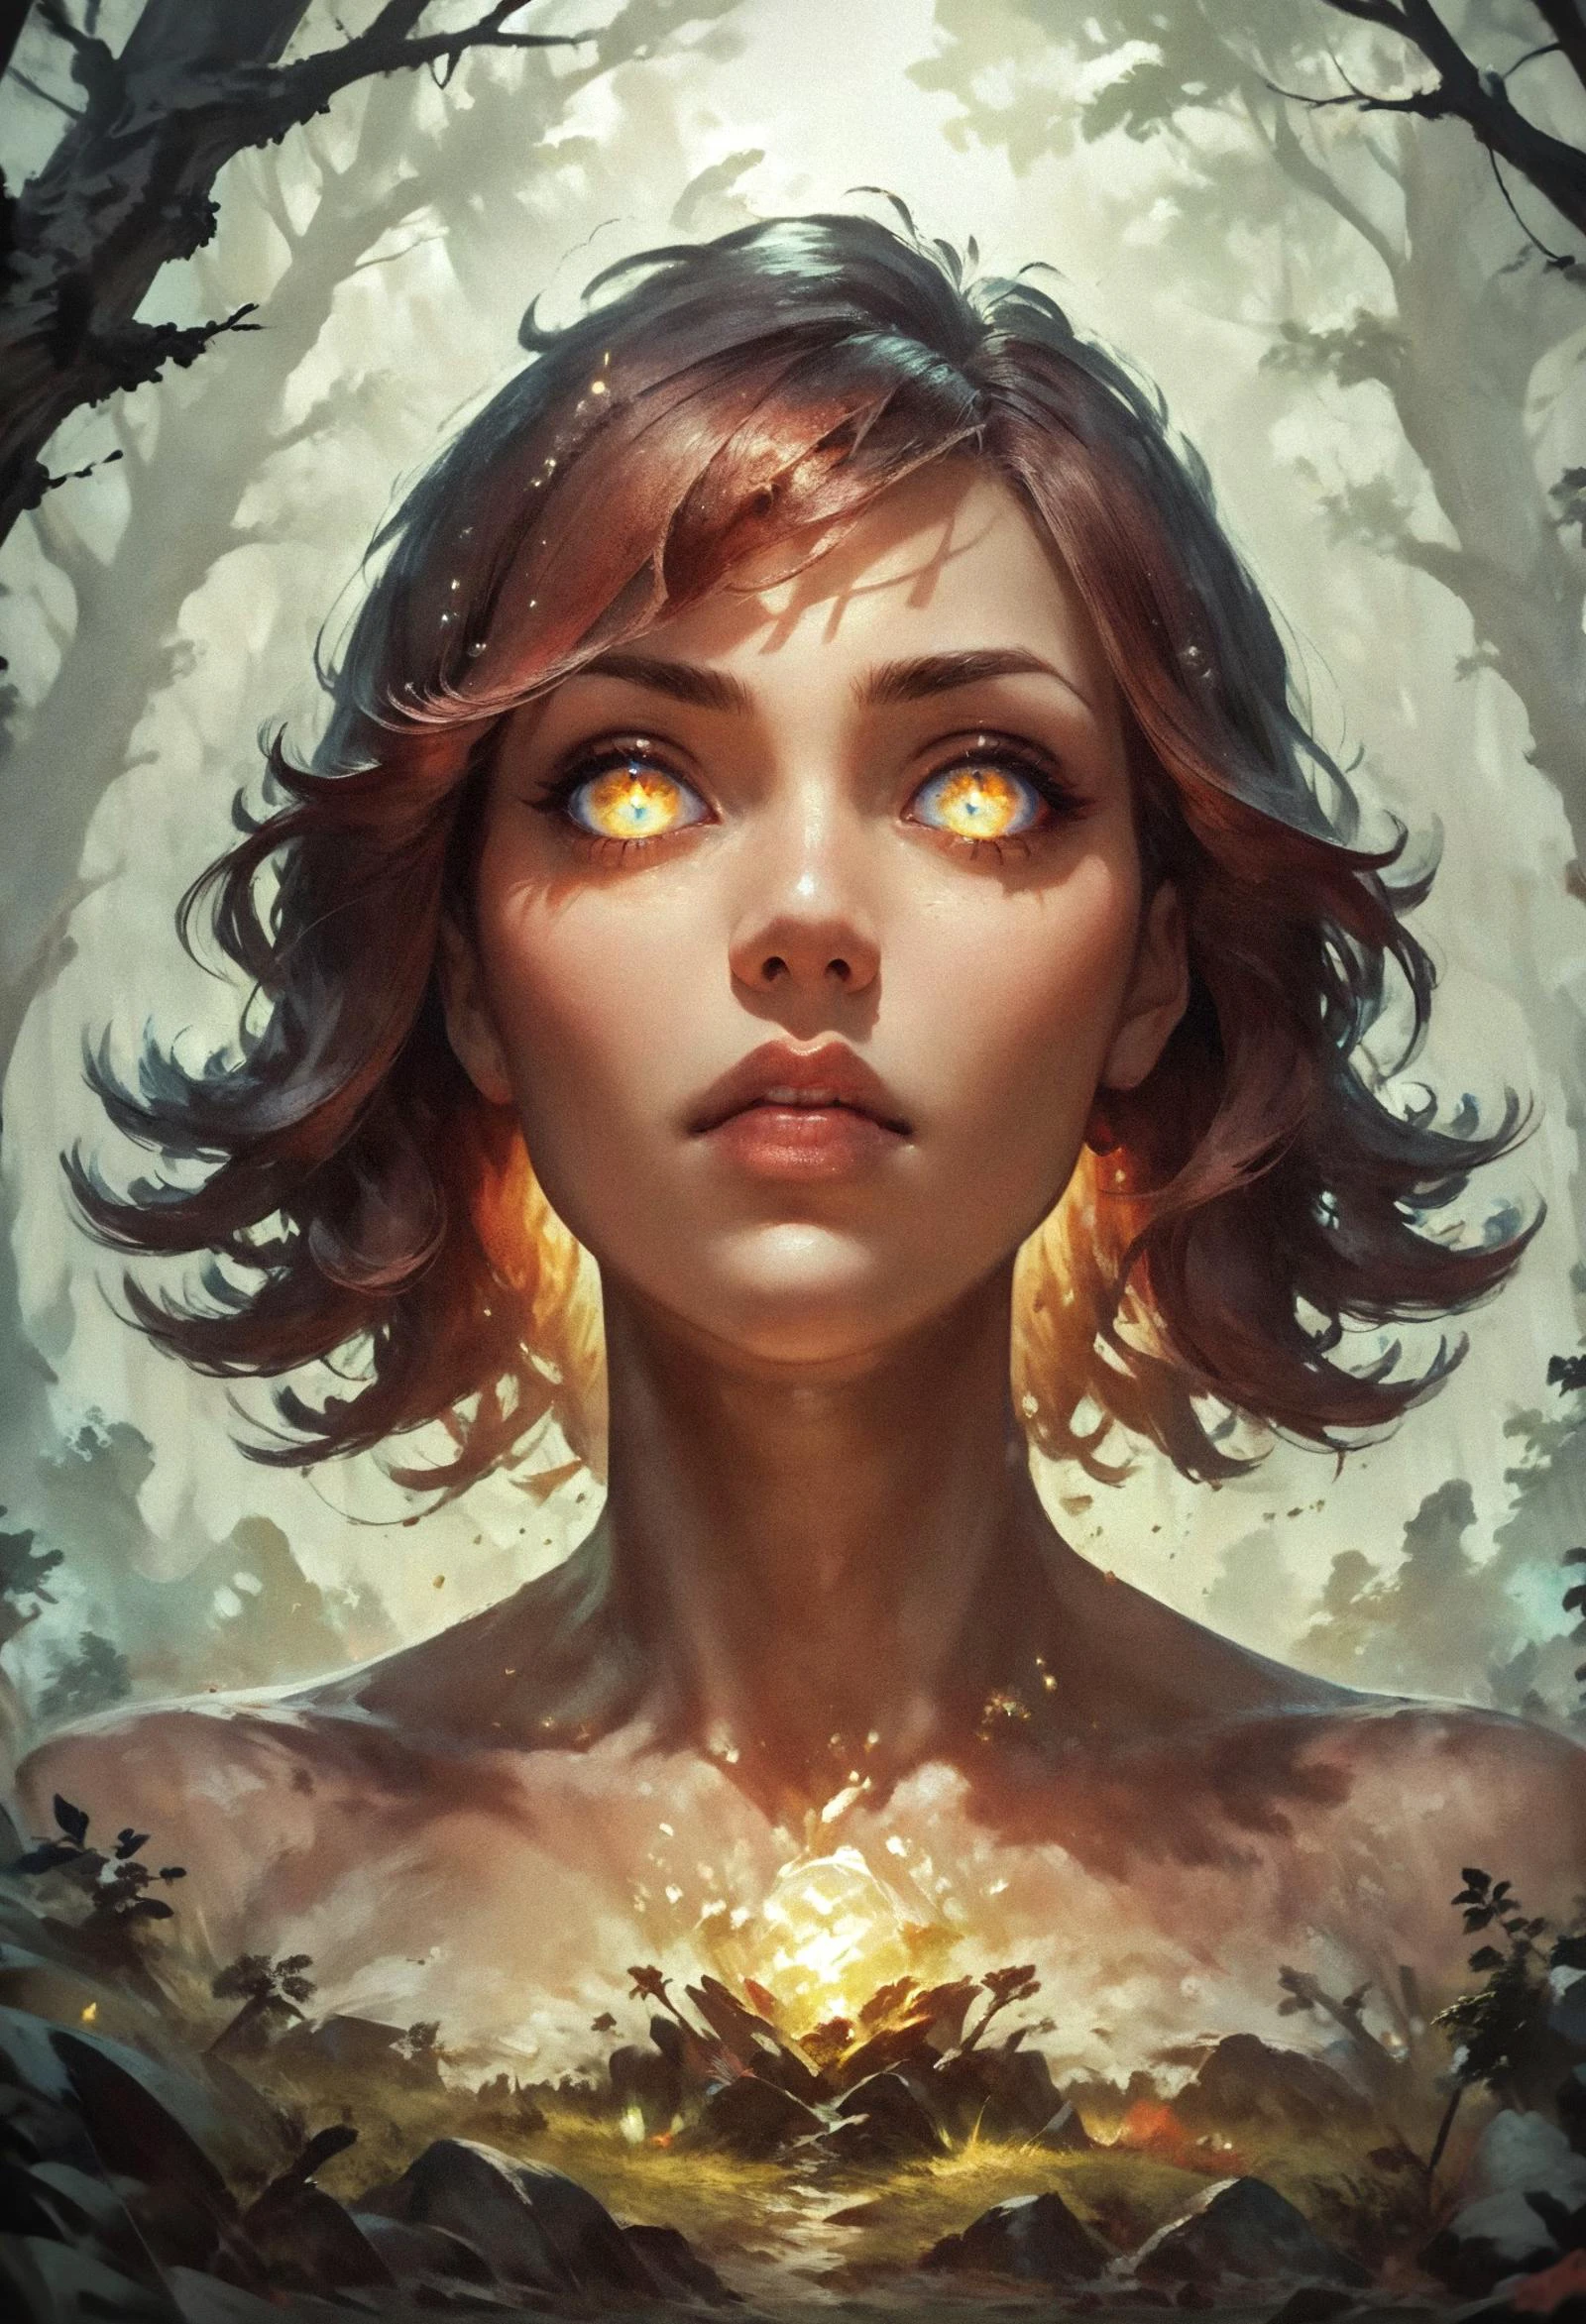 score_9, score_8_up, score_7_up,   hyper realistic, detailed view, hero view, (1girl:1.1), woman solo, standing in the forest, (full glowing body:1.1), night creatures, light elemental, glowing hair, glow  concept art, realistic